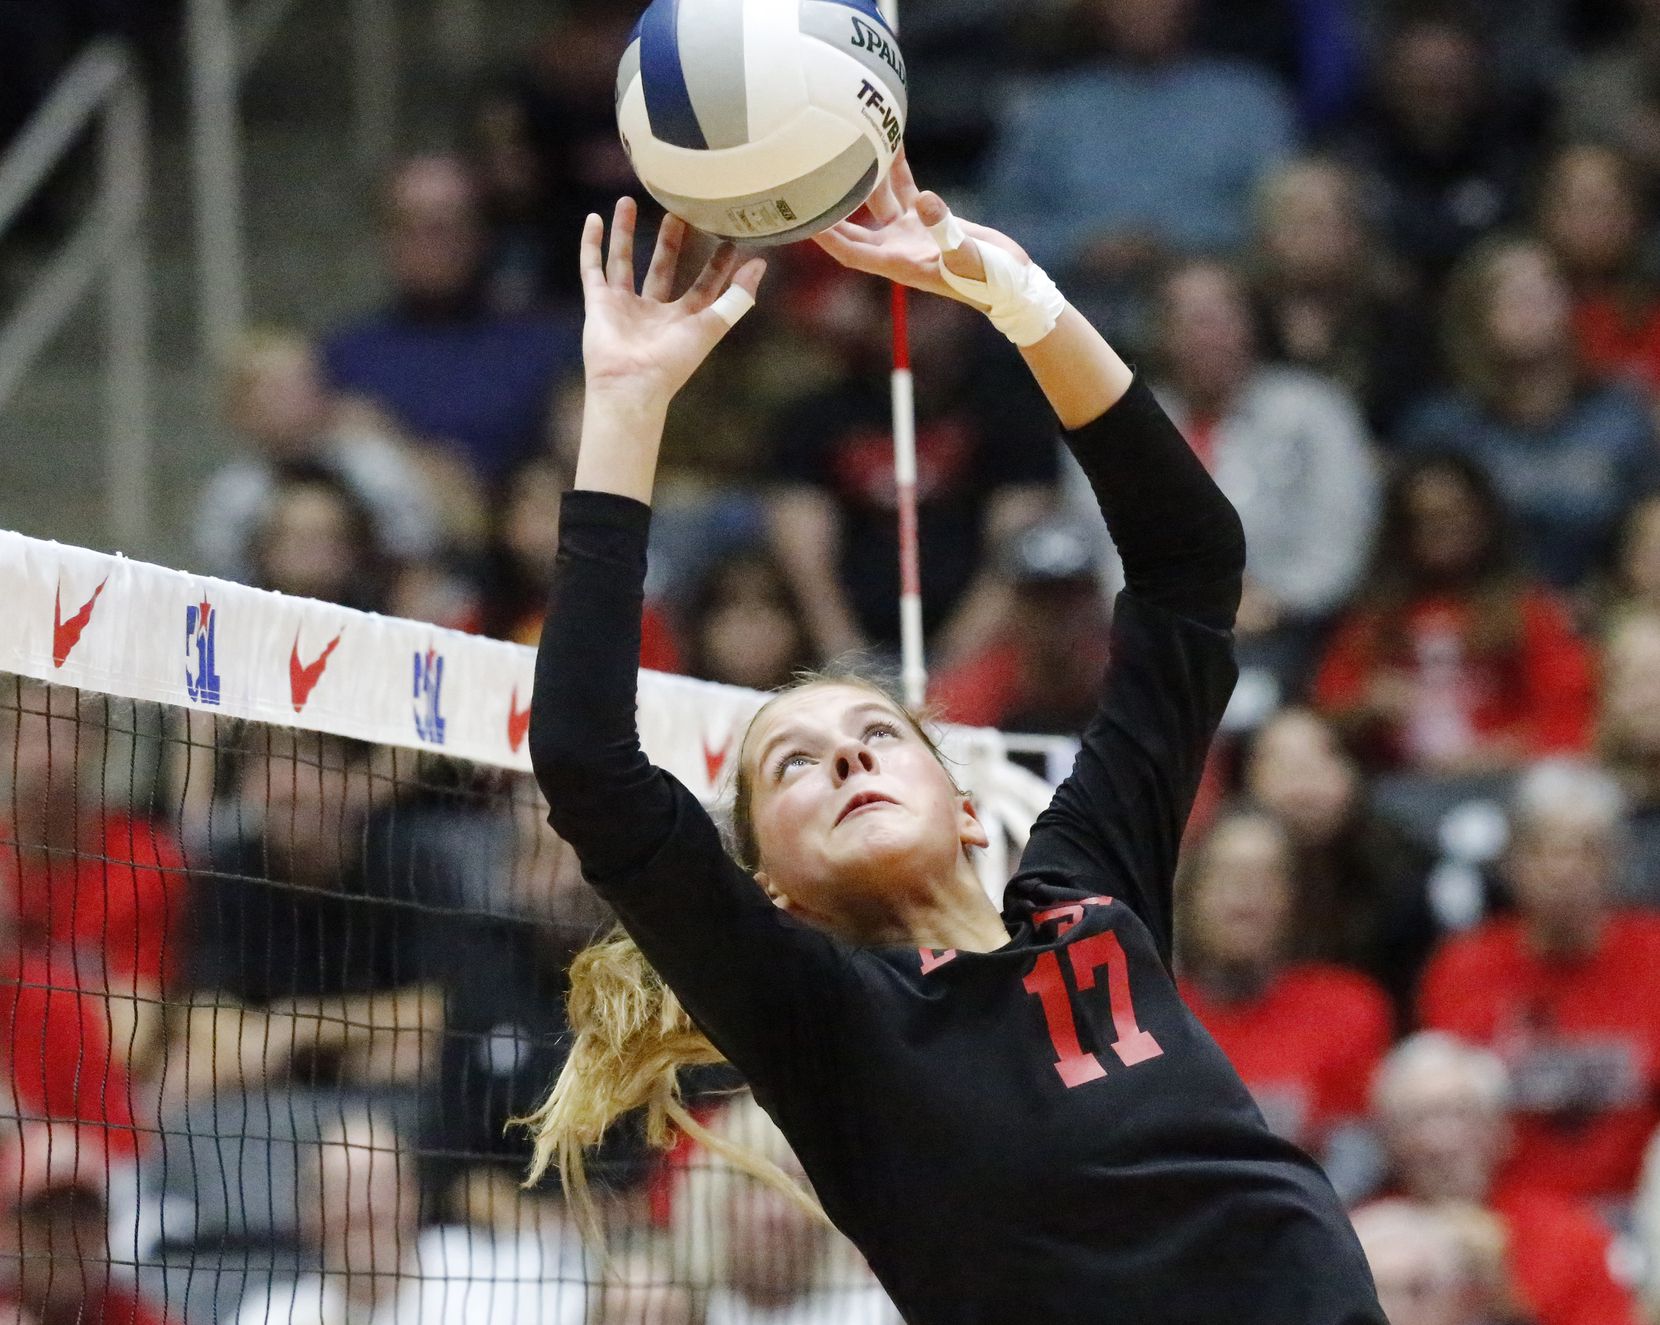 Lovejoy’s Rosemary Archer (17) makes a set during game two as Grapevine High School played Lovejoy High School in the UIL 5A State Championship match held at the Curtis Culwell Center in Garland on Saturday, November 20, 2021. (Stewart F. House/Special Contributor)